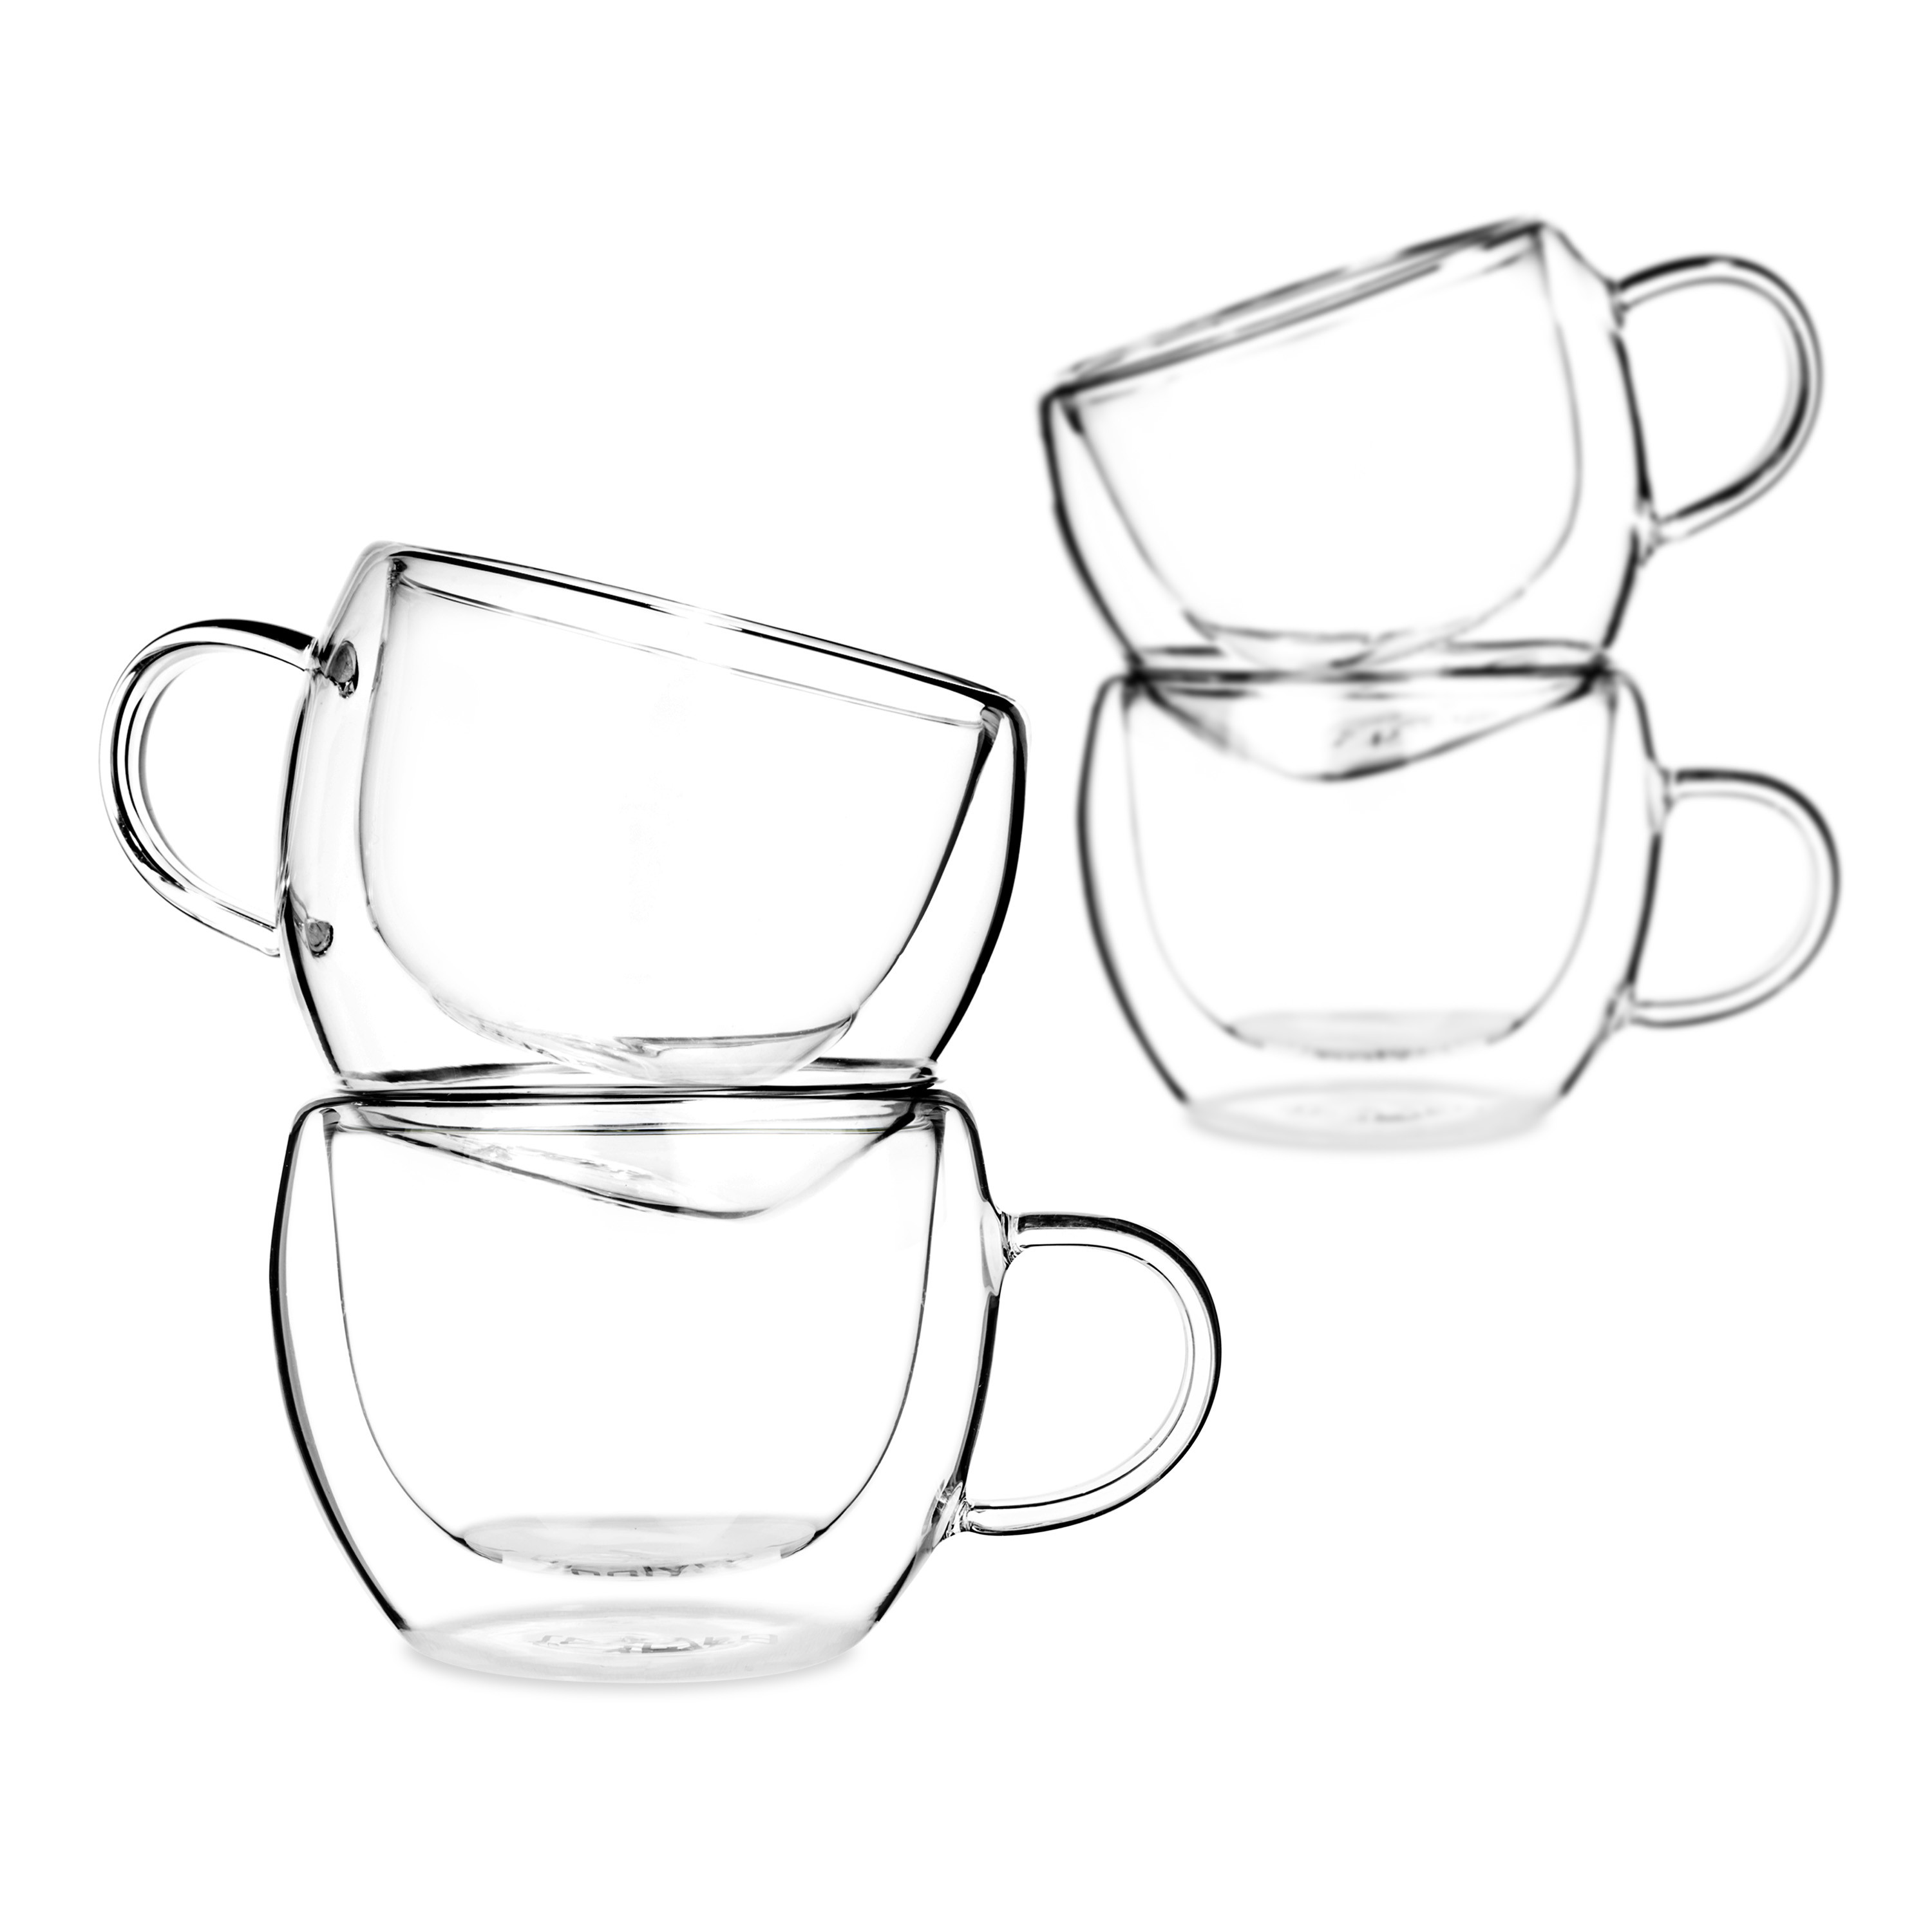 https://cdn.tealyra.com/images/detailed/8/universe-double-wall-glasses-set-of-4.jpg